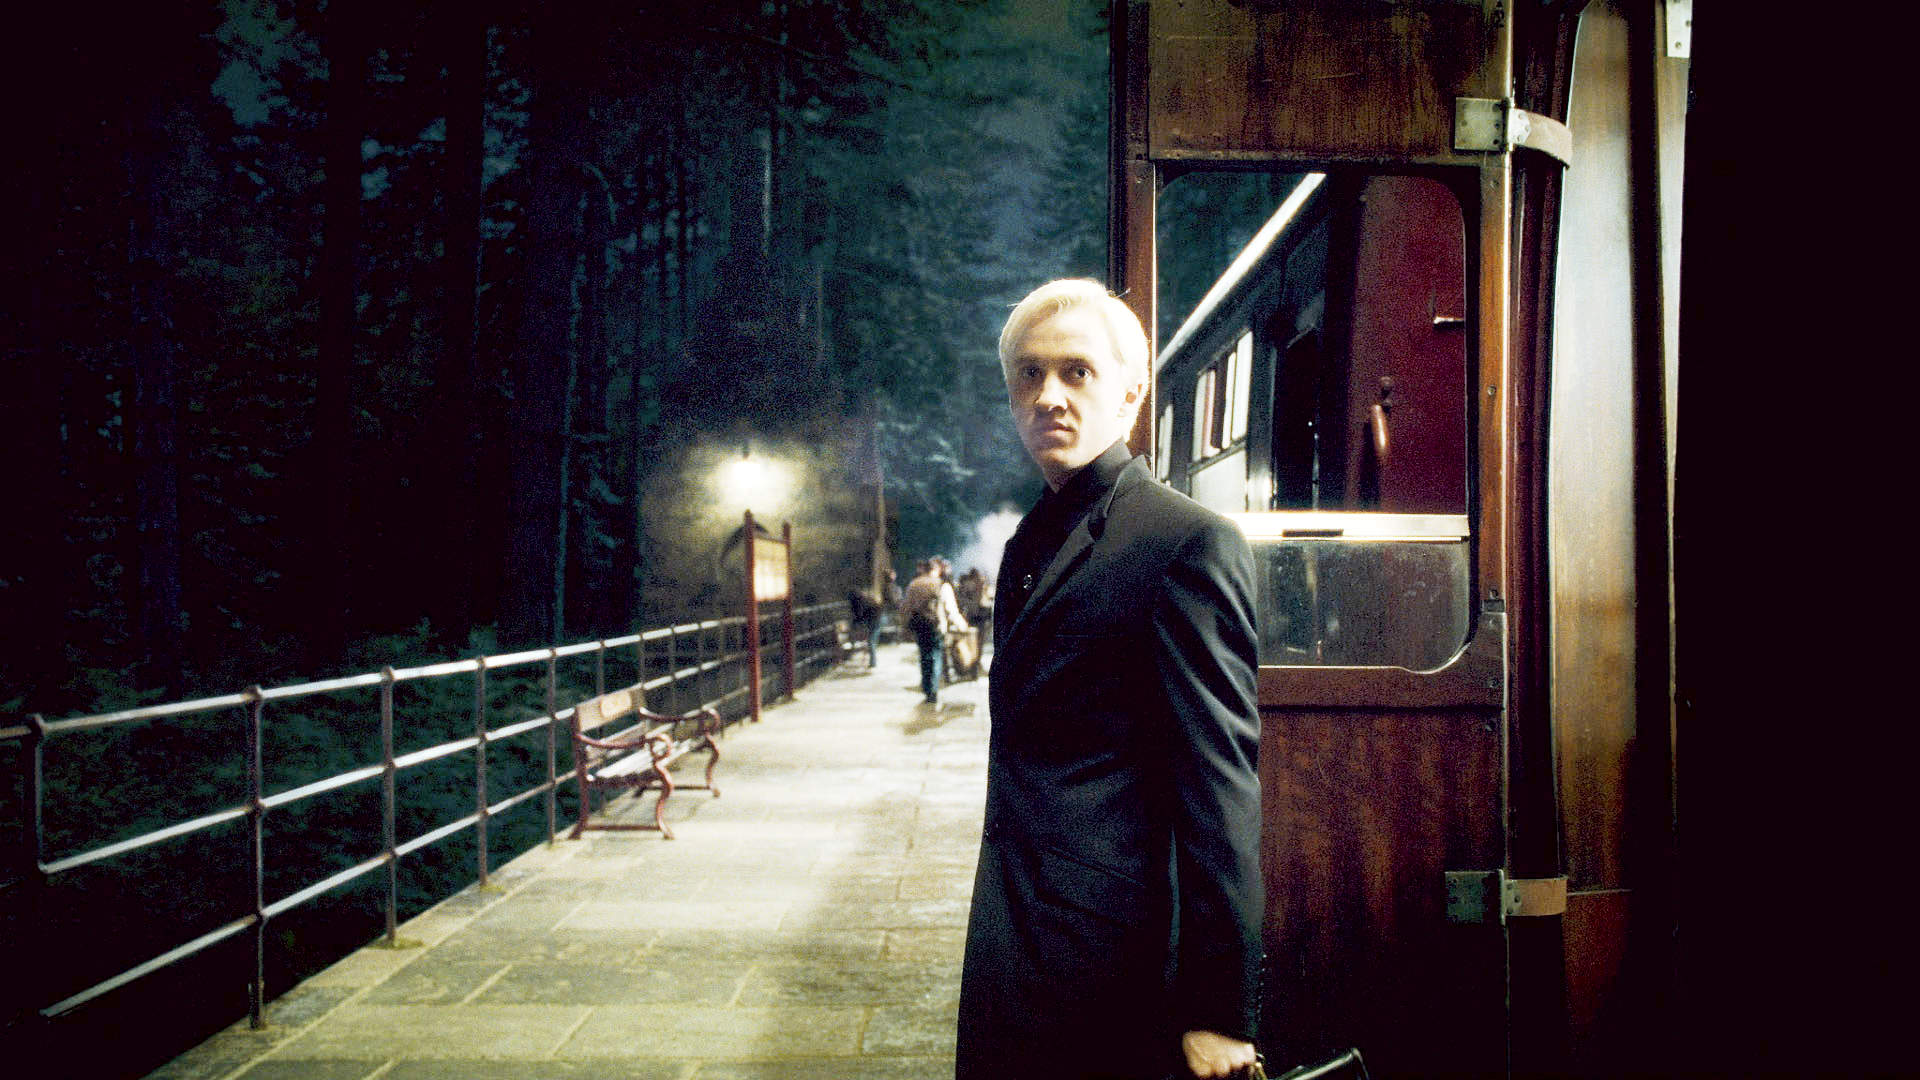 Tom Felton stars as Draco Malfoy in Warner Bros Pictures' Harry Potter and the Half-Blood Prince (2009)